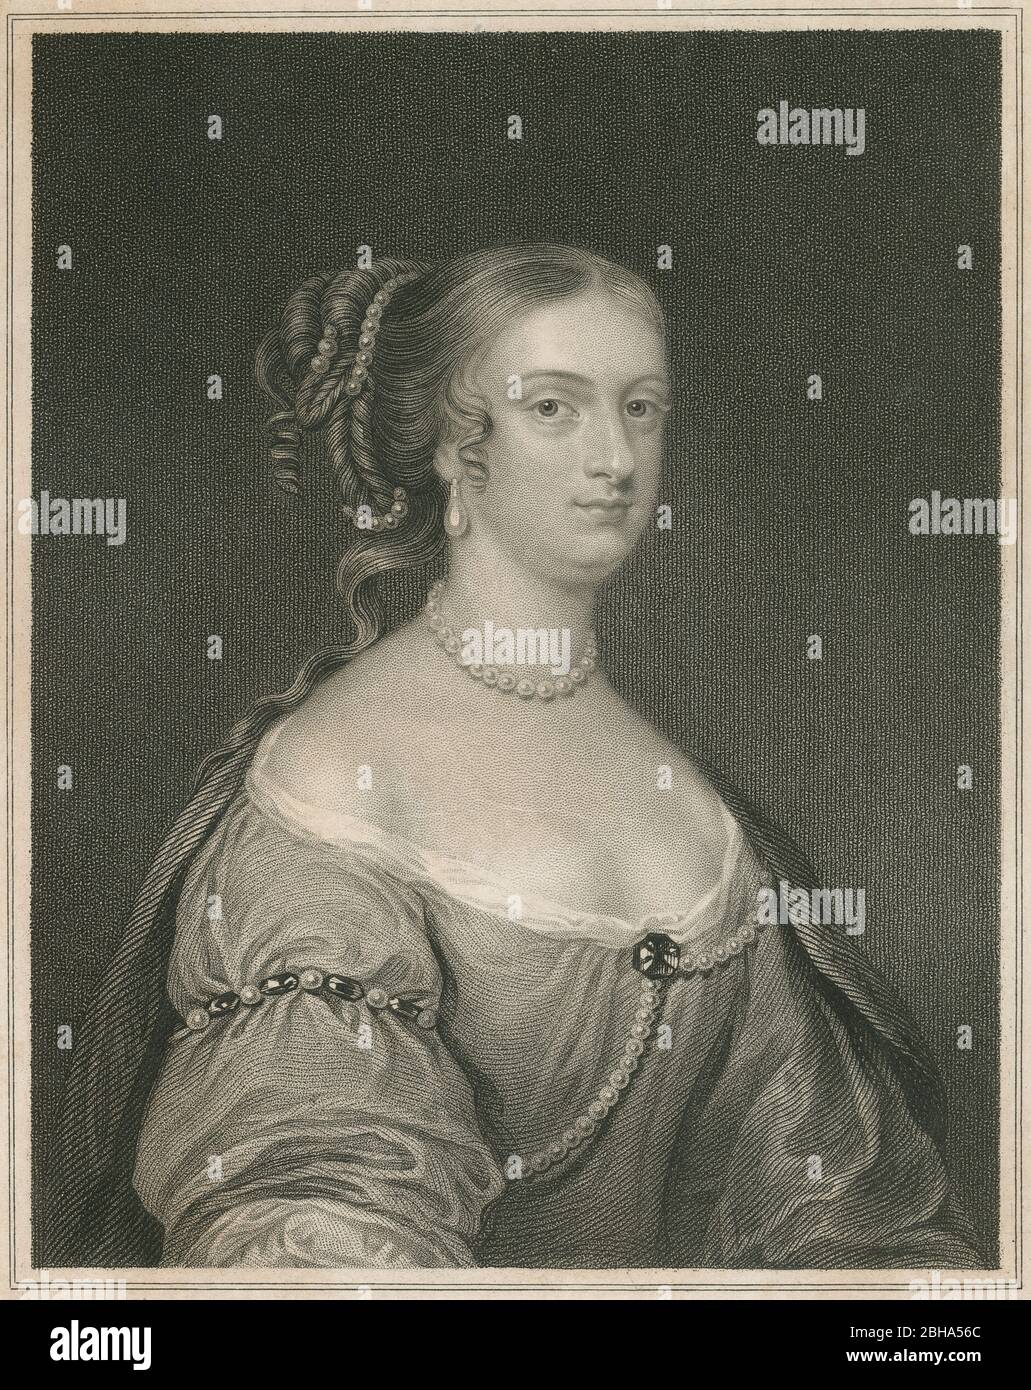 Antique 1836 engraving, Rachel Russell, Lady Russell. Rachel, Lady Russell (c1636-1723) was an English noblewoman, heiress, and author. SOURCE: ORIGINAL ENGRAVING Stock Photo